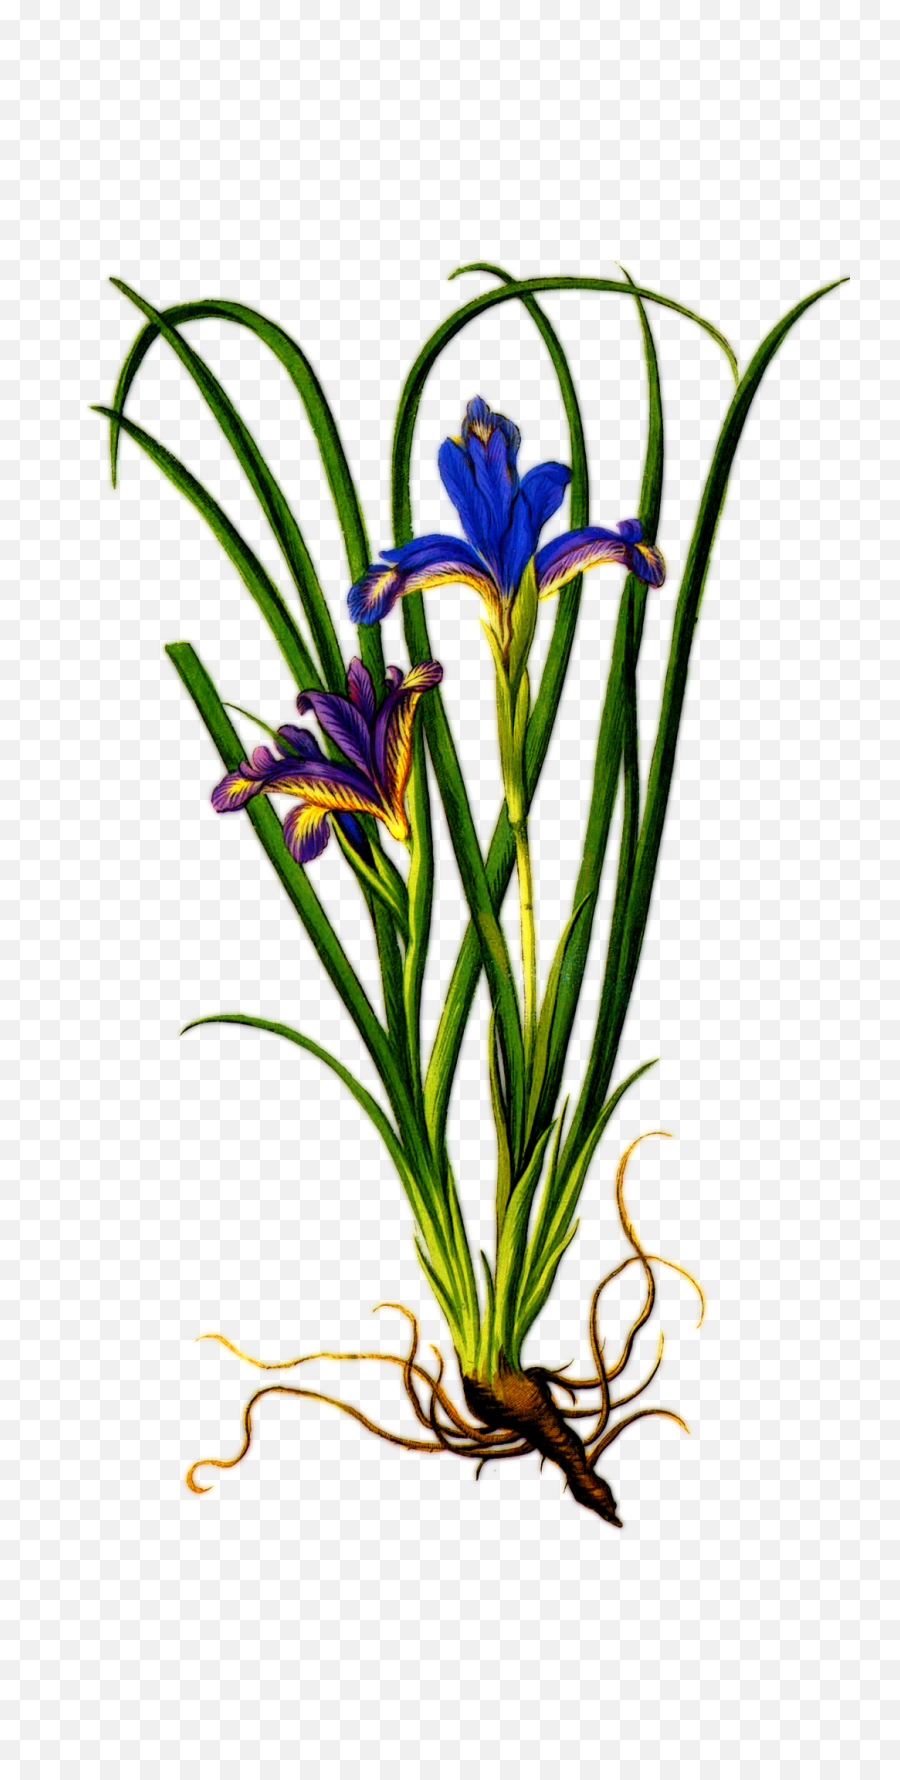 Download Iris Flower Png Clipart - Iris Flower With Roots,Iris Flower Png